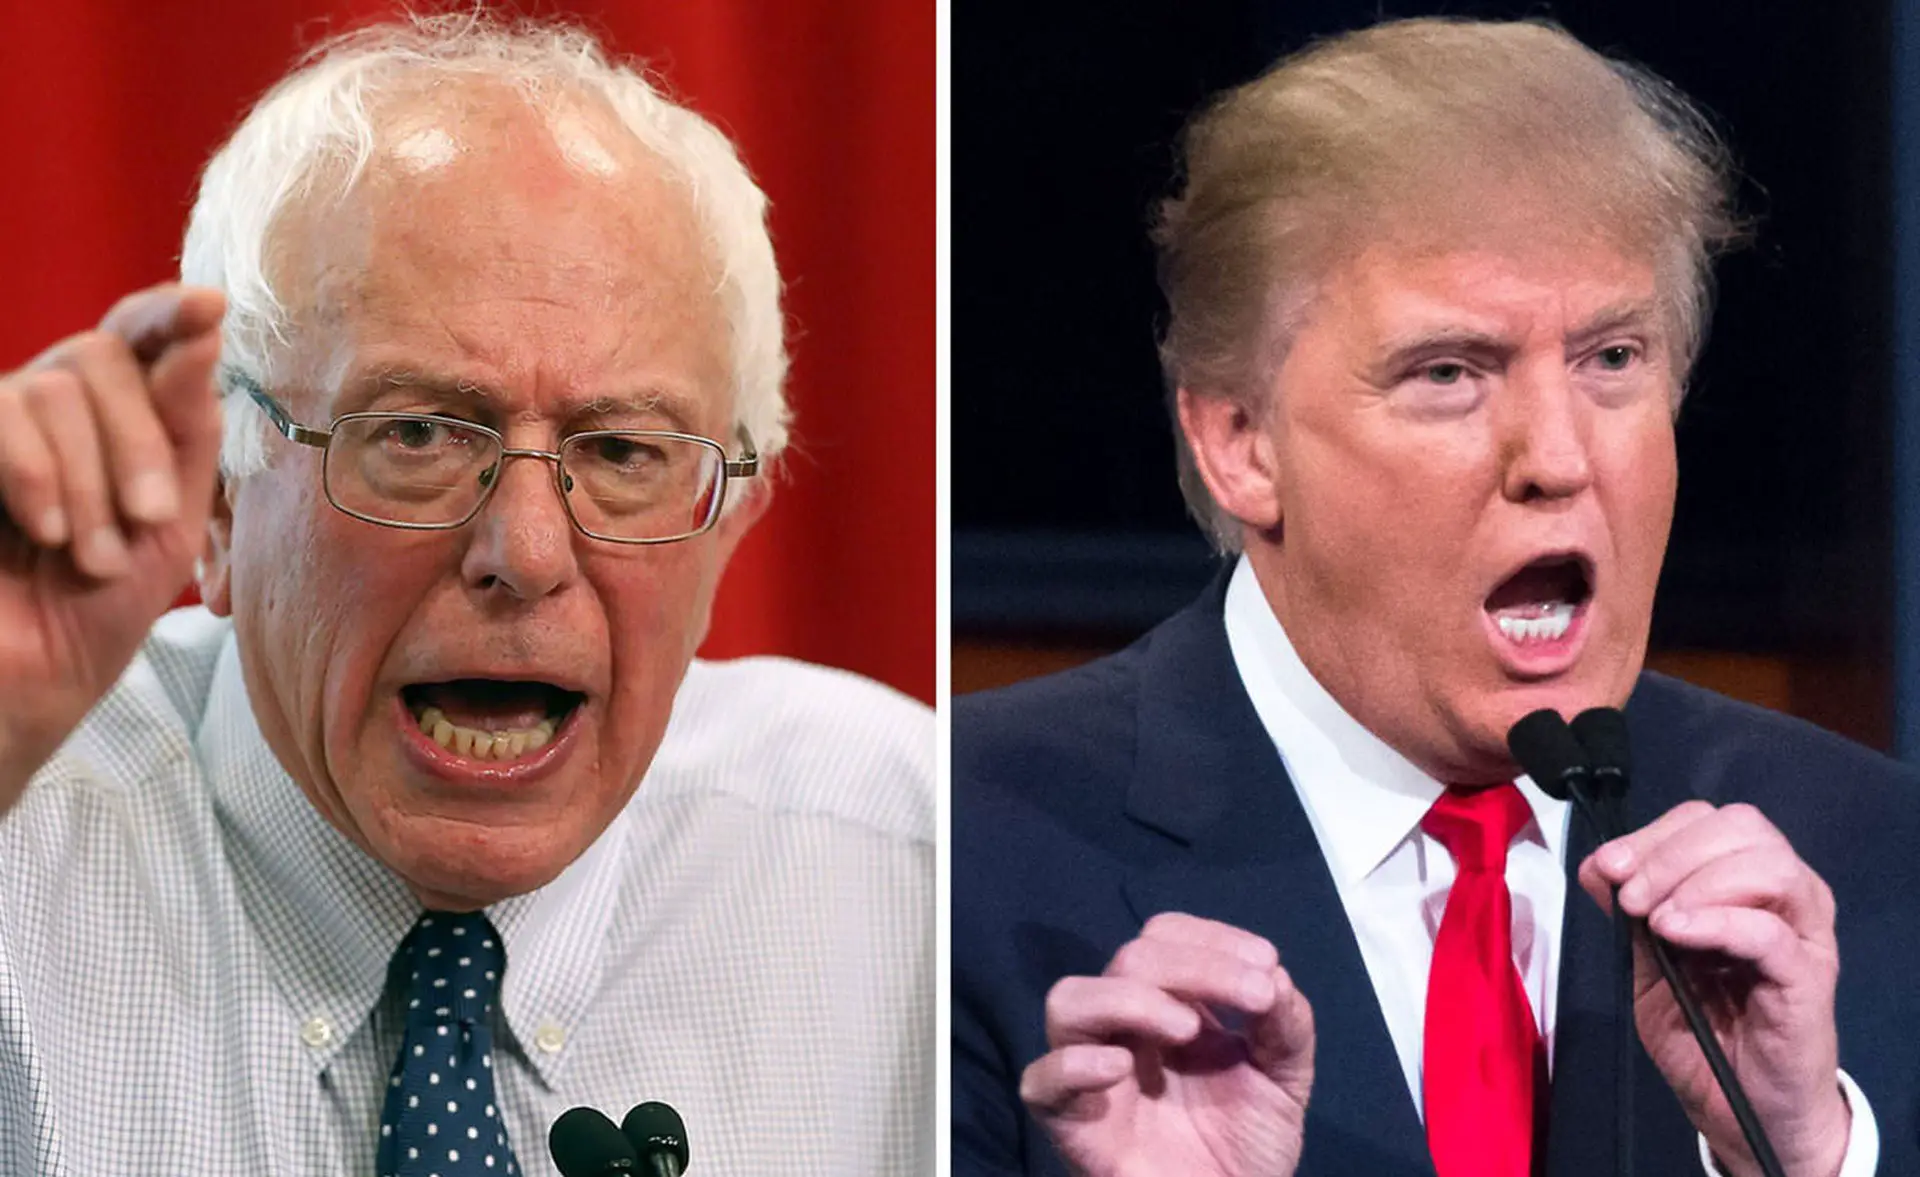 Trump and Sanders Are Both Conservatives